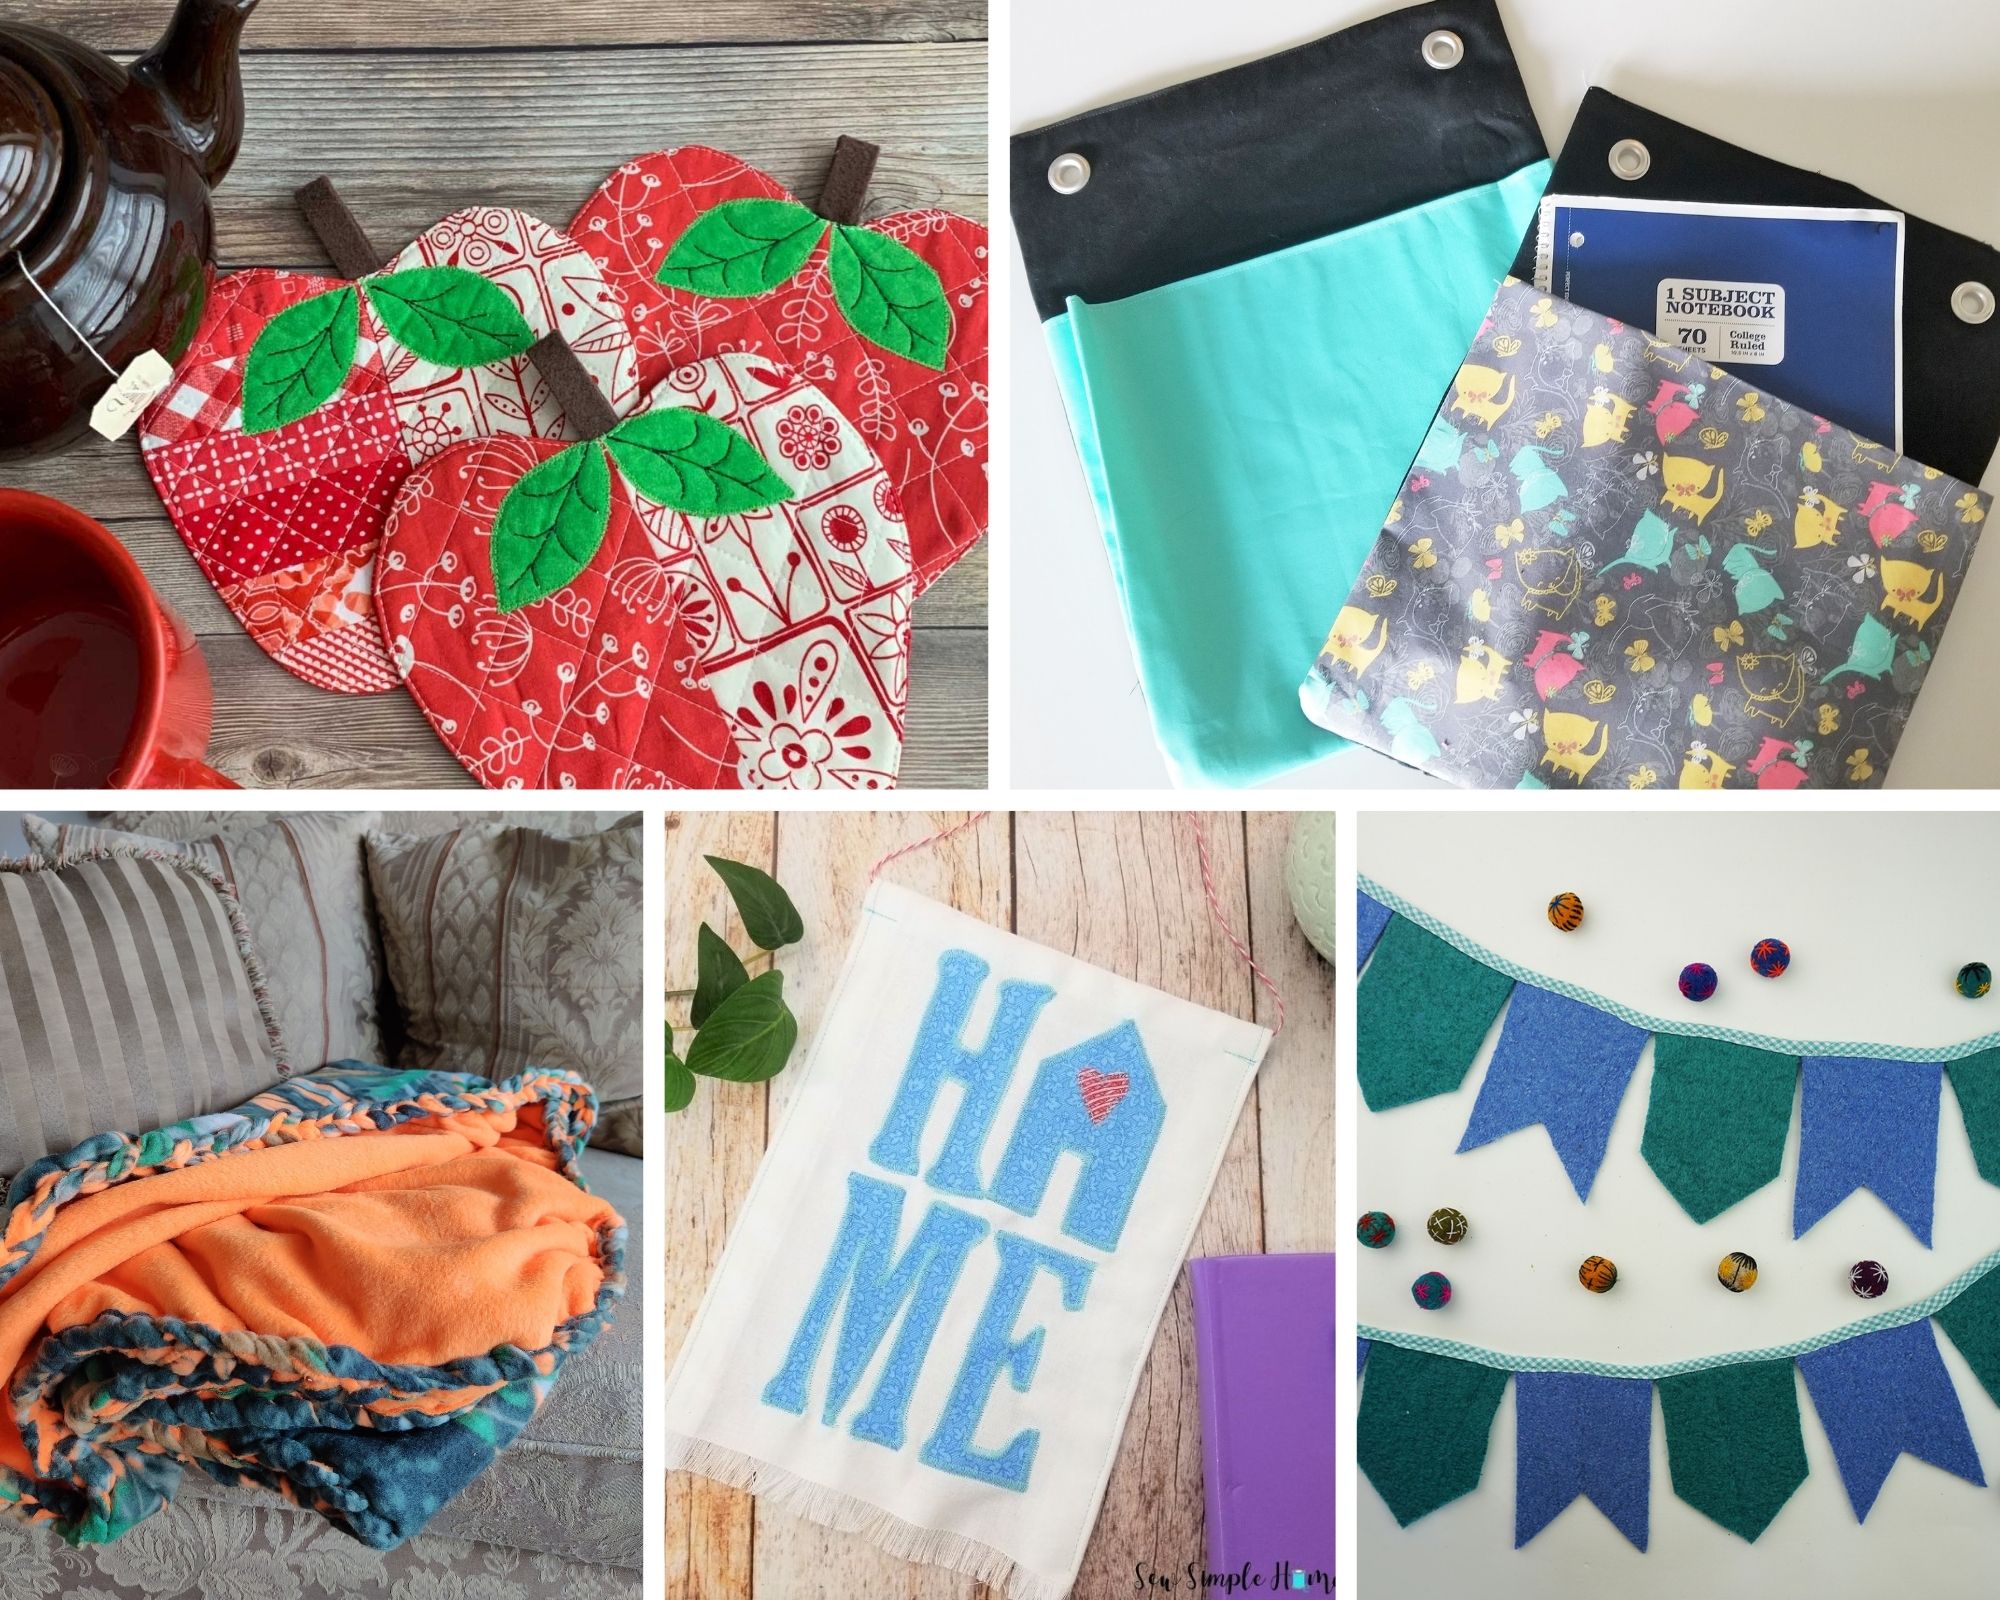 8 Useful Sewing Projects to Make for the Home - Makyla Creates